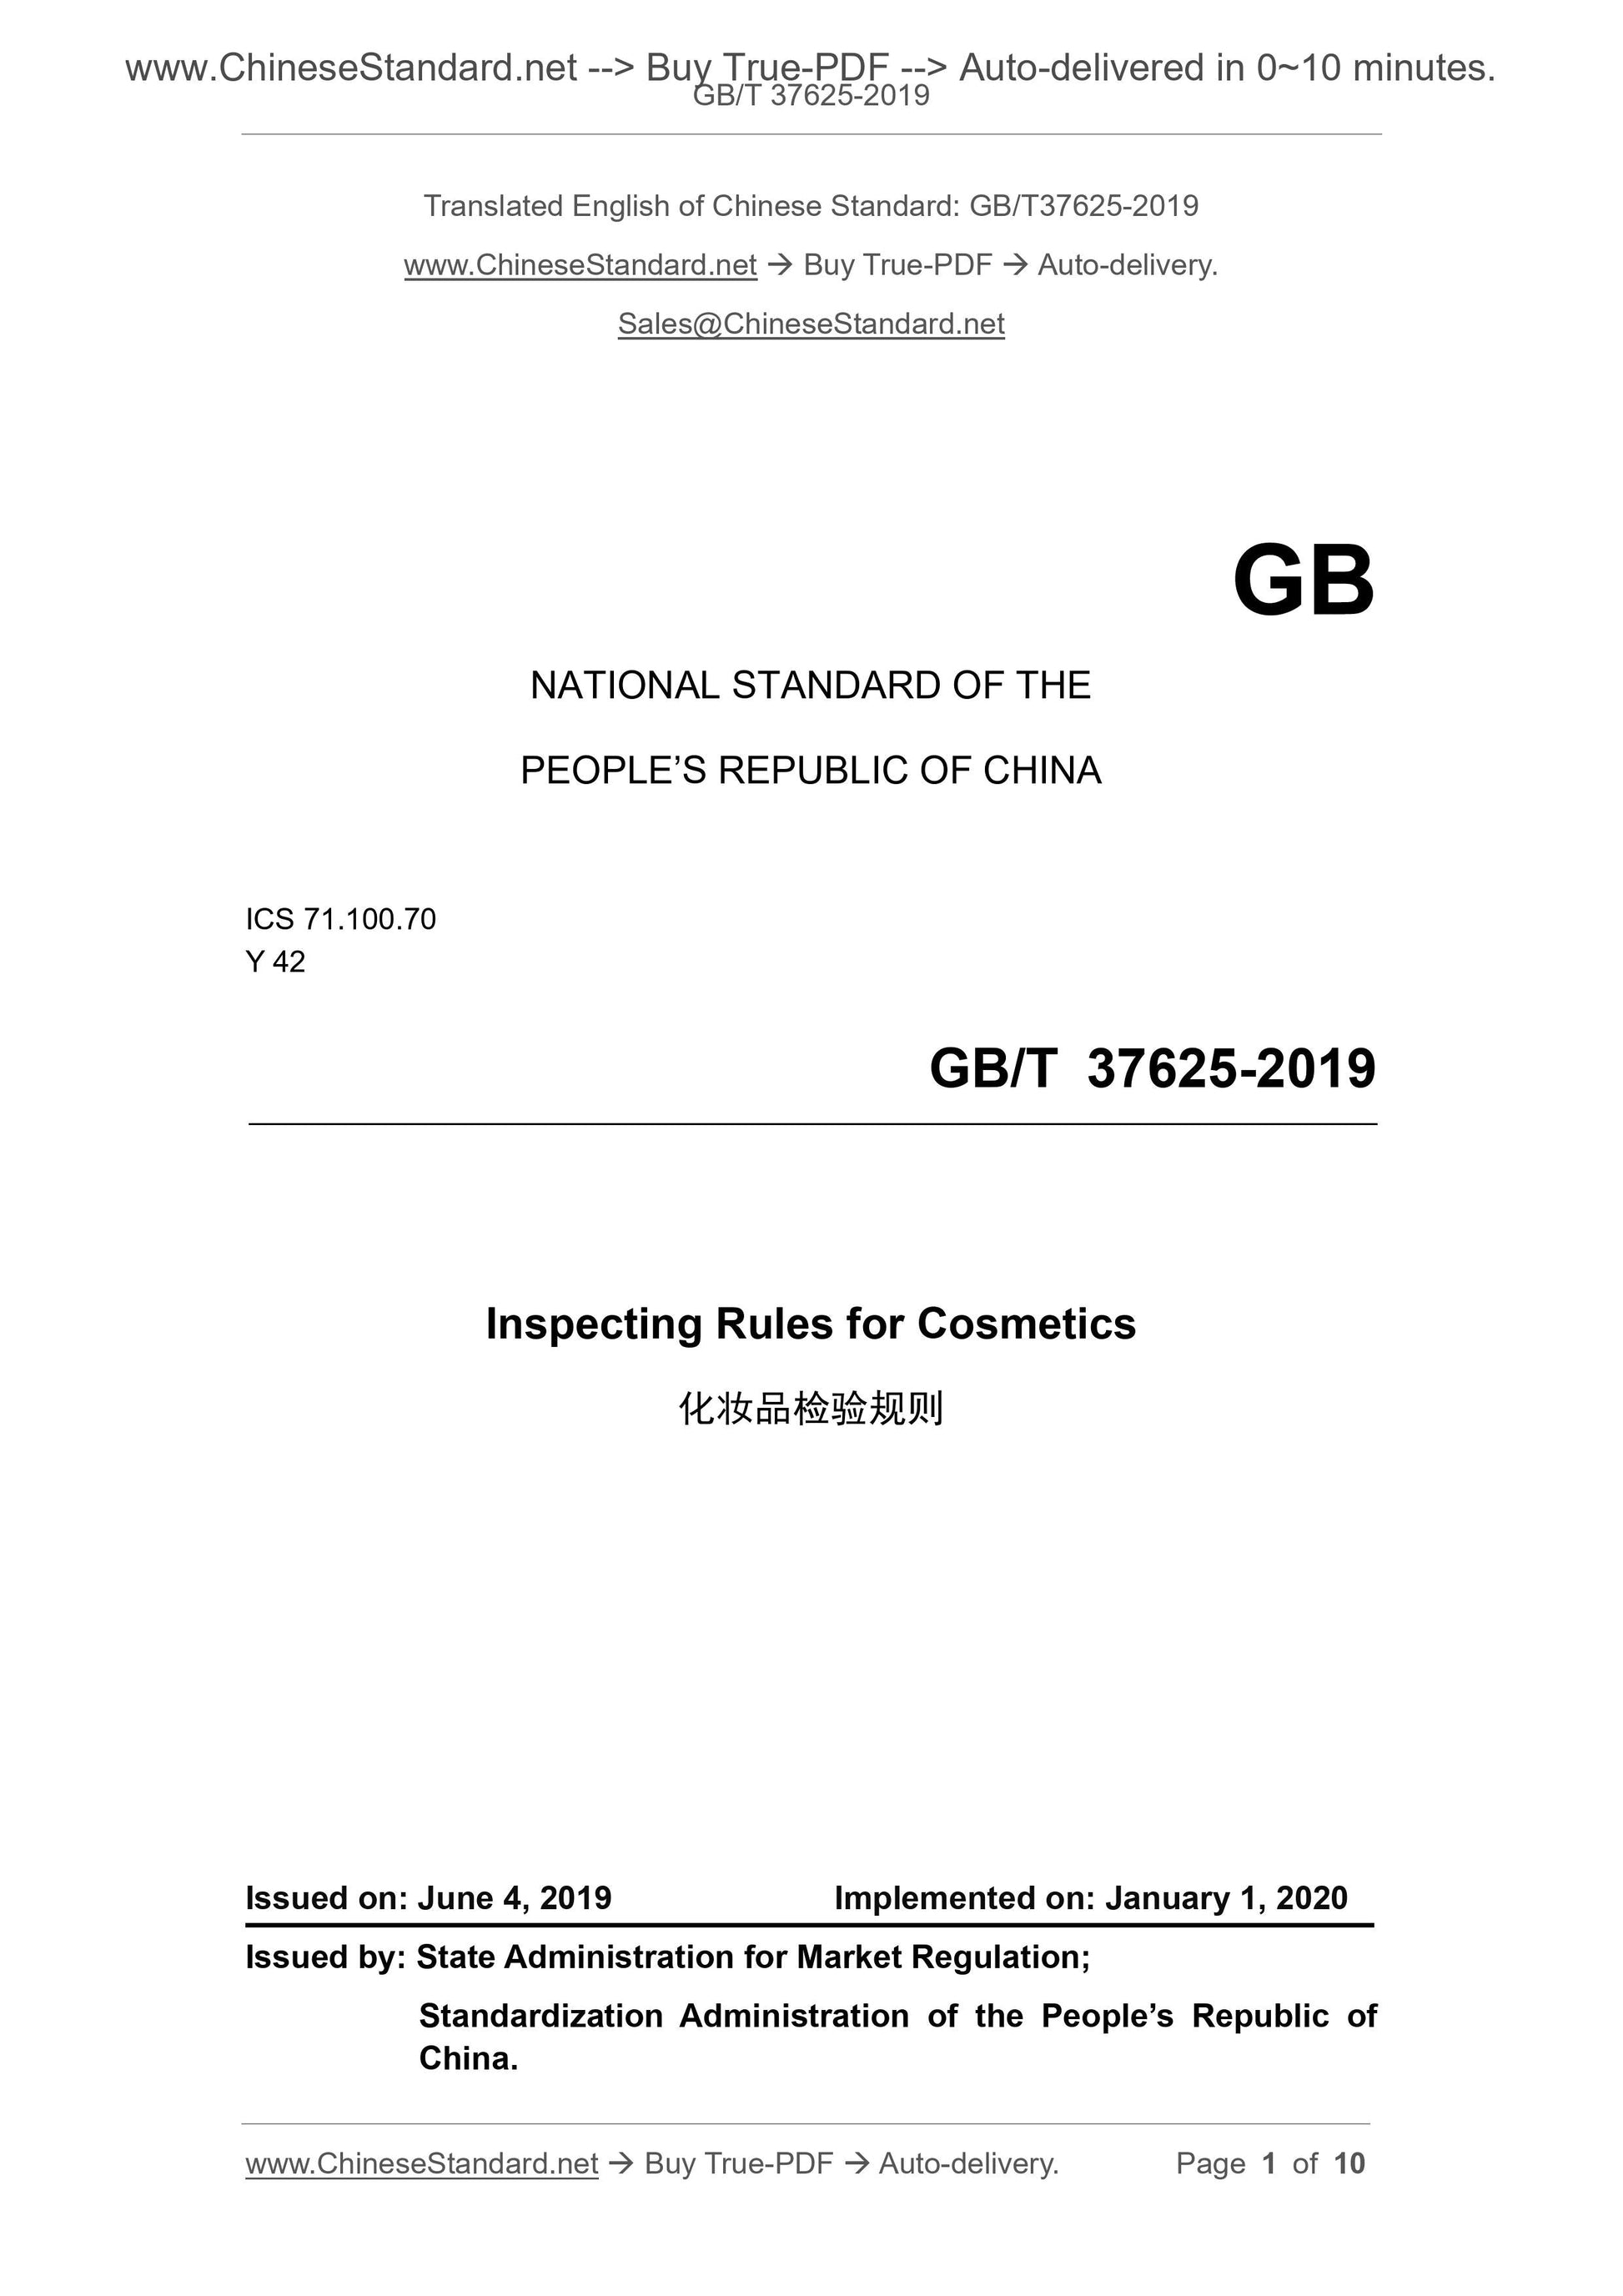 GB/T 37625-2019 Page 1